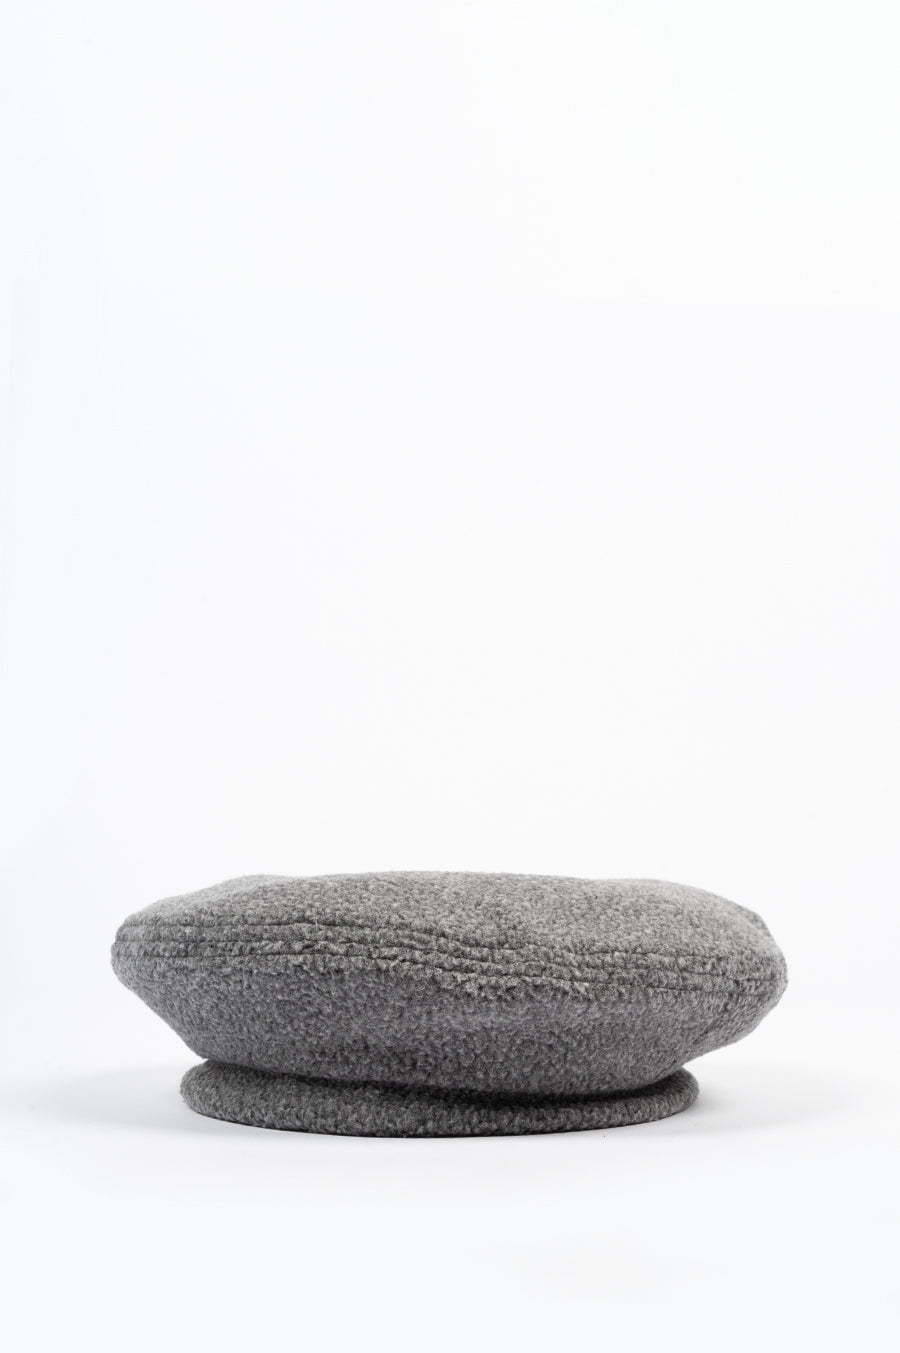 HOUSE OF PAA BERET GREY